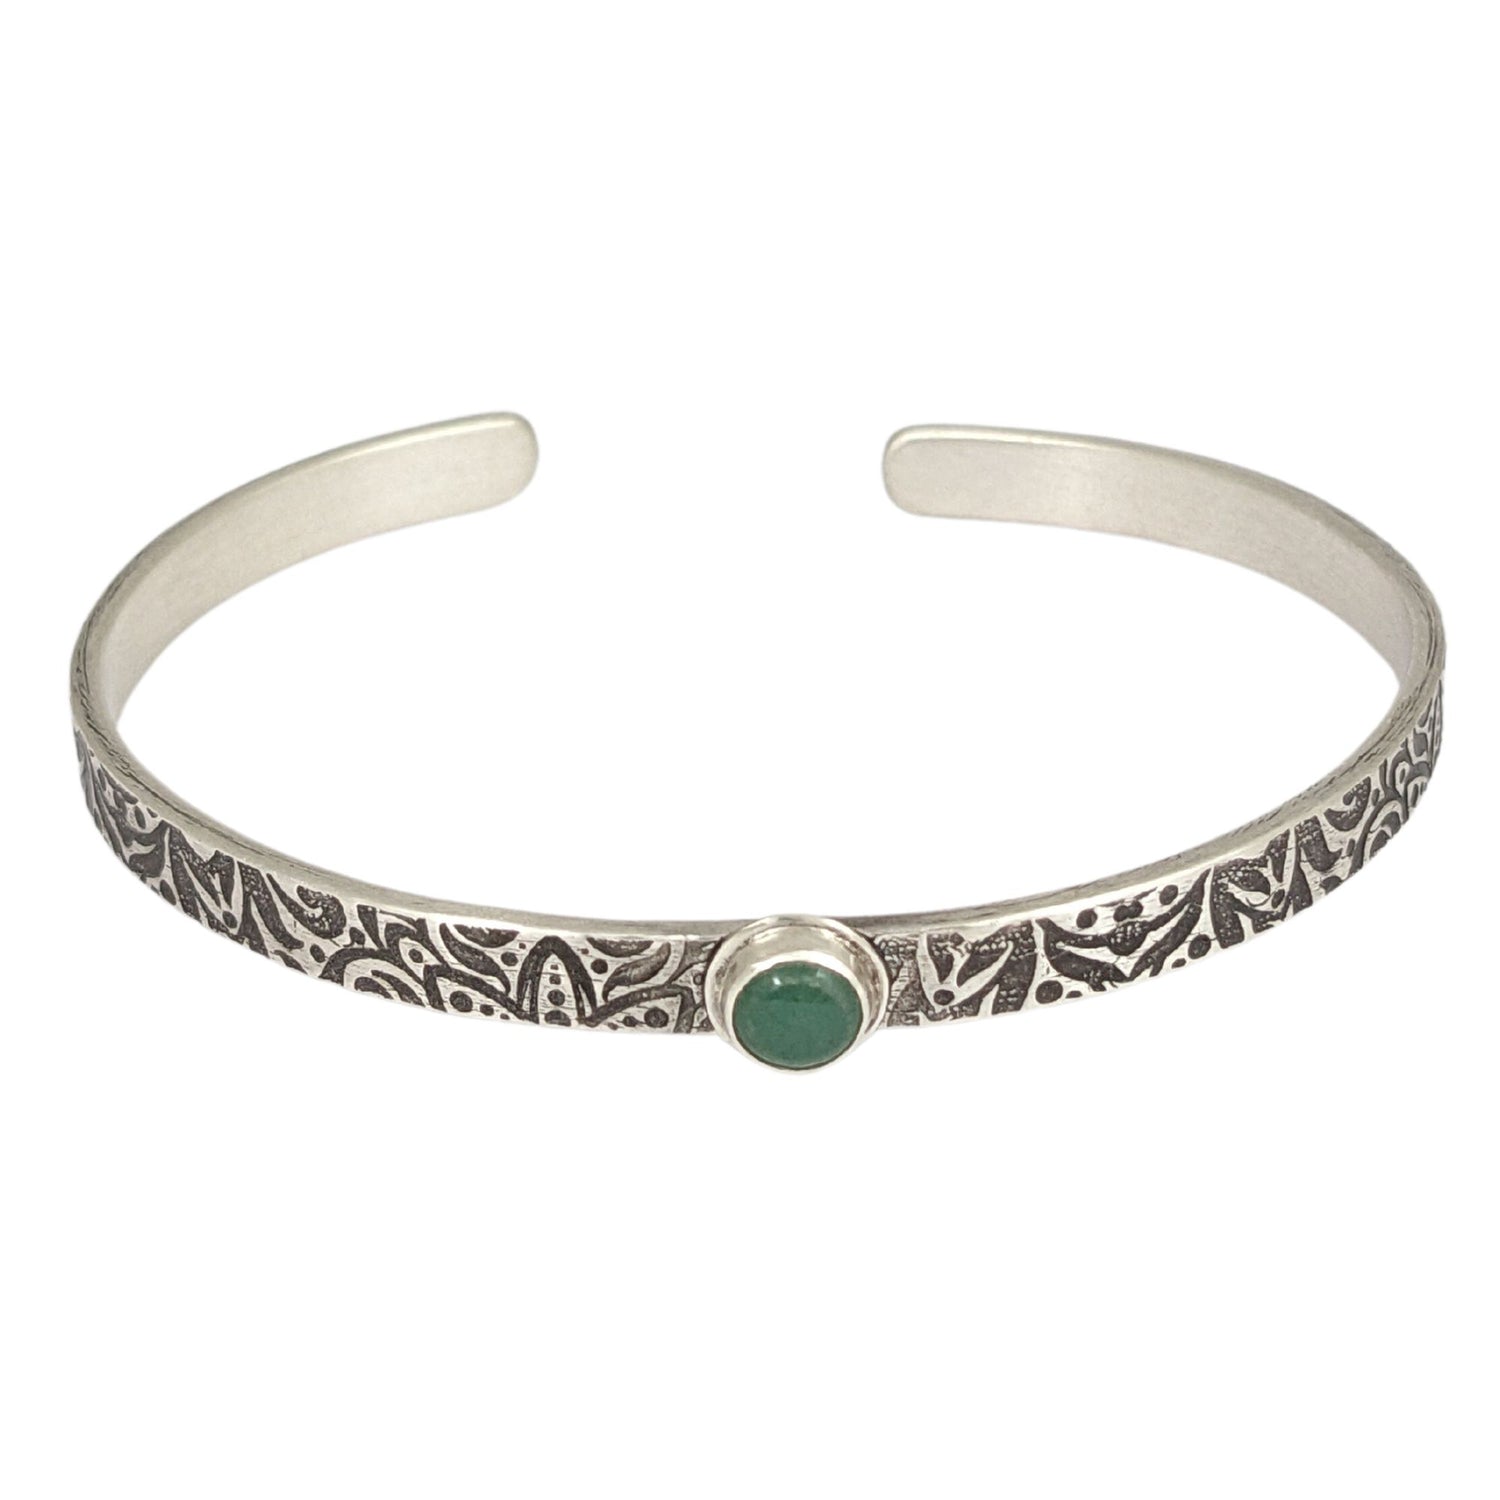 Narrow sterling silver cuff bracelet with a green aventurine gemstone. The rectangular silver wire has a n abstract impressed design, and the impression is oxidized black to bring out the details.